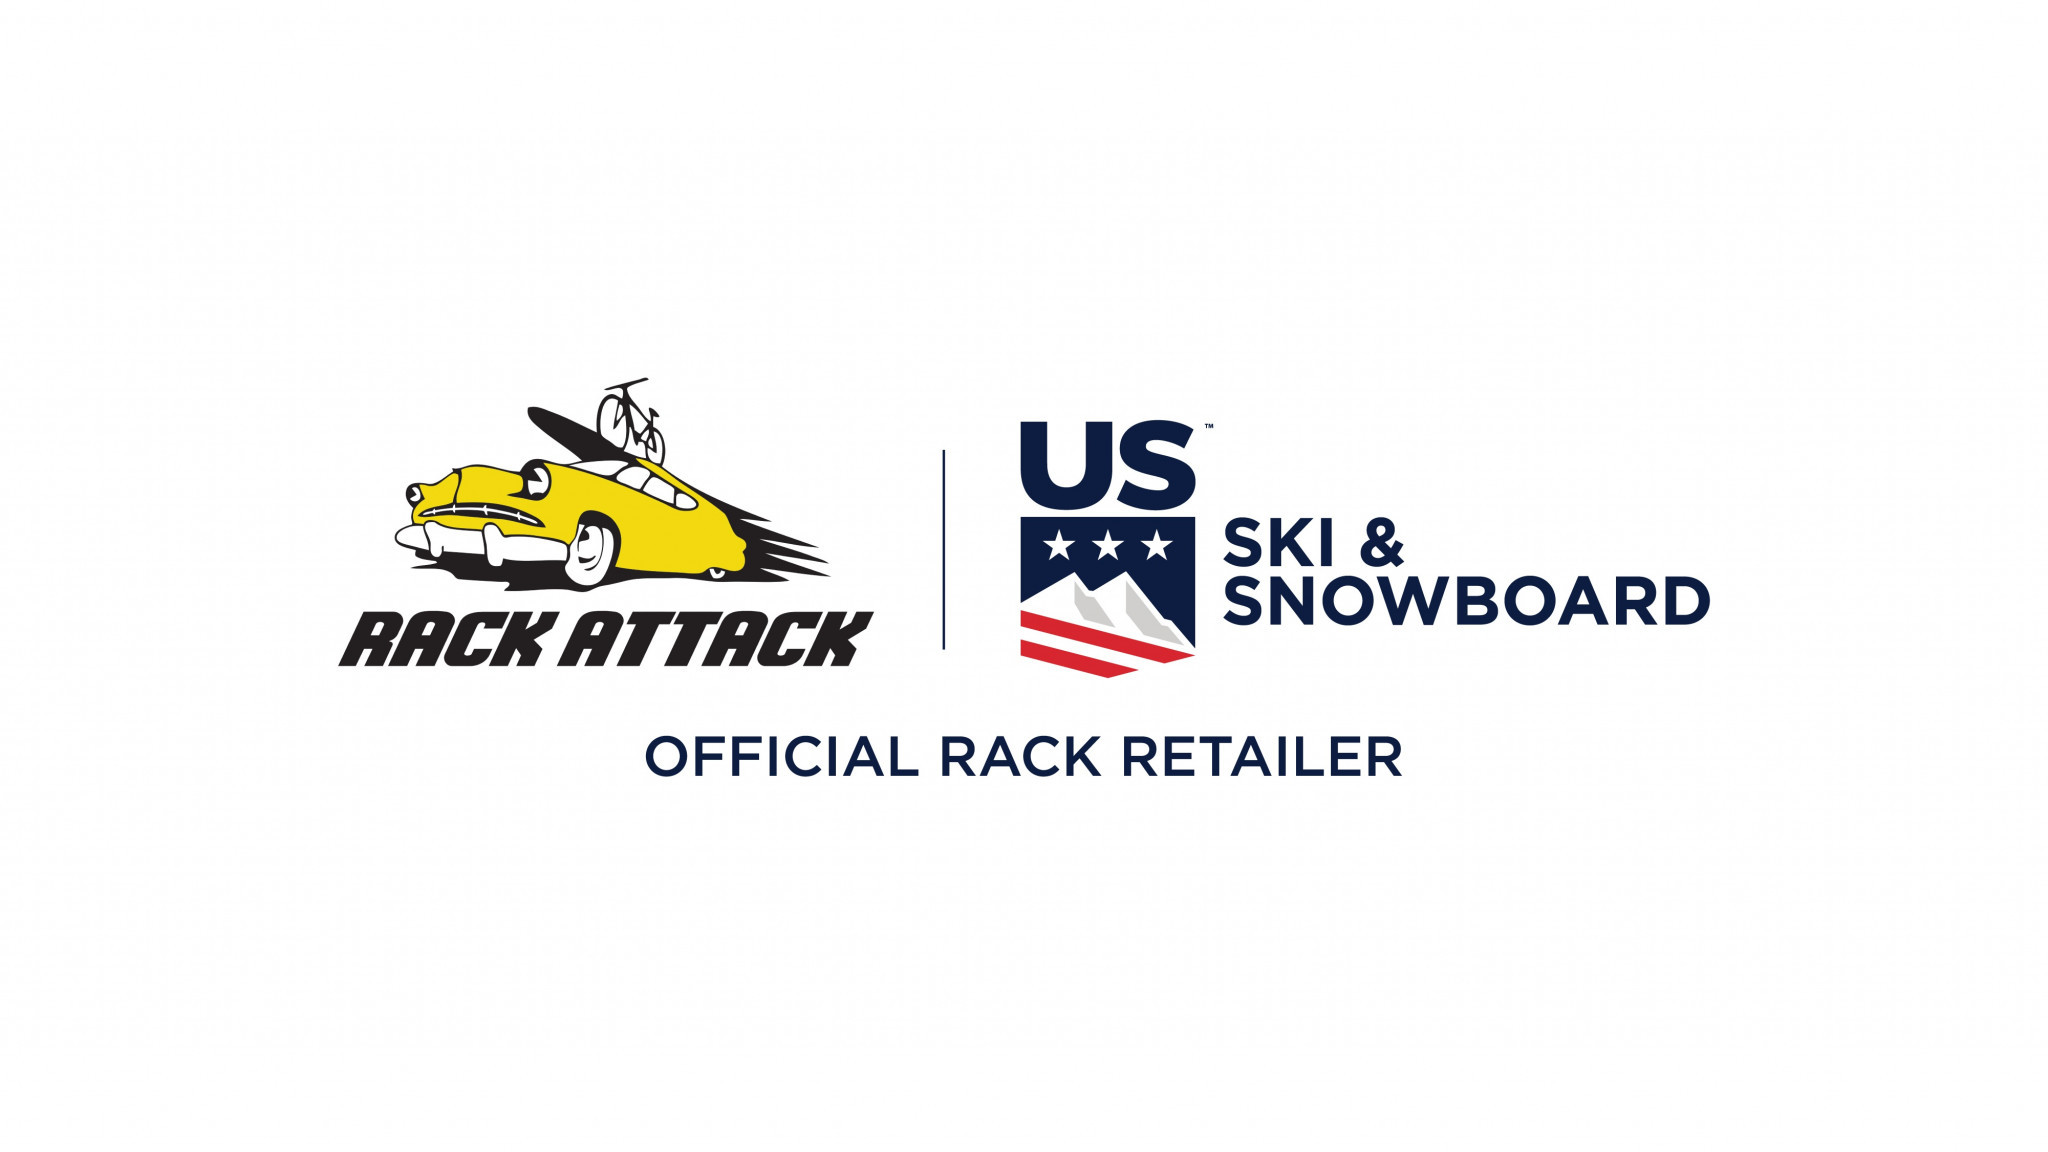 US Ski and Snowboard names Rack Attack as official rack retailer